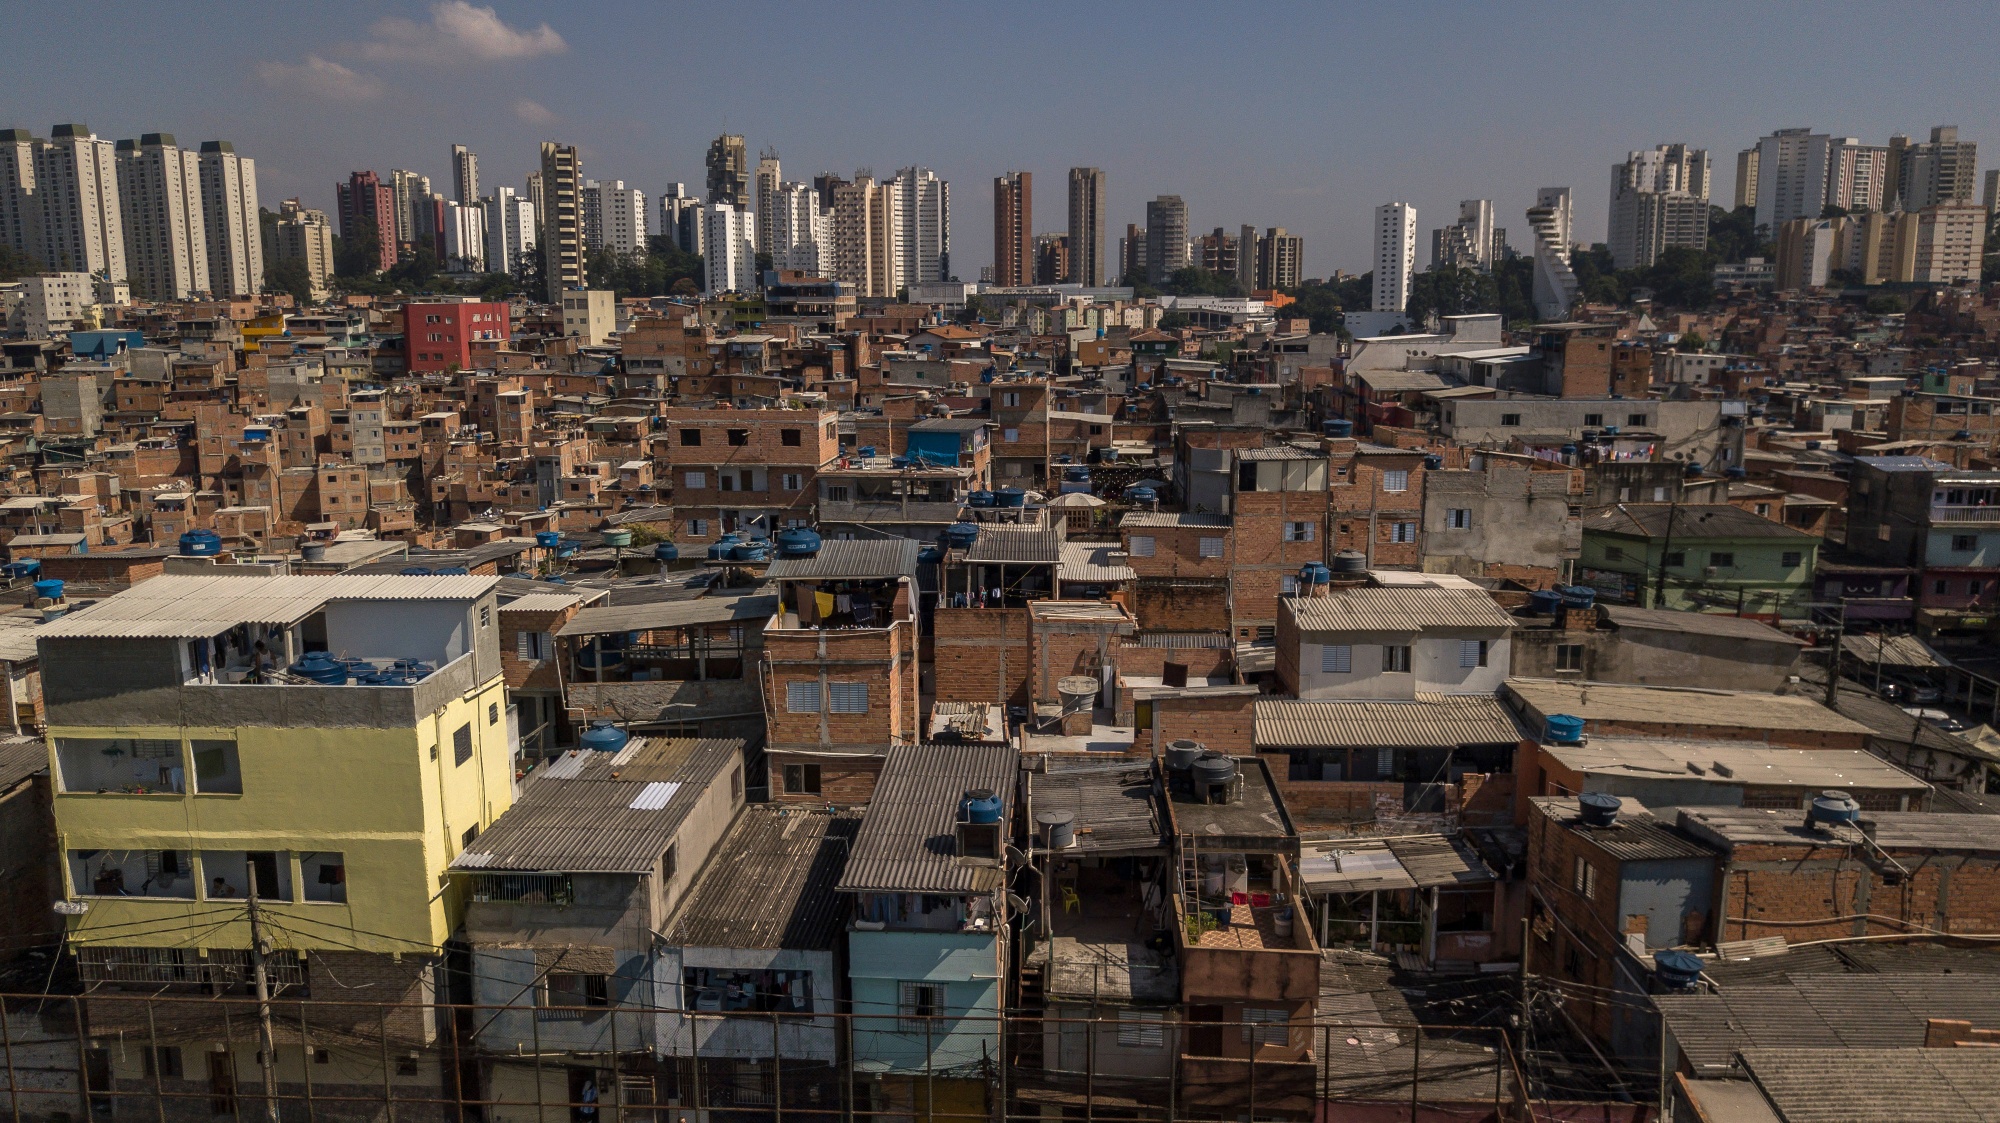 How One of Brazil's Largest Favelas Confronts Coronavirus - Bloomberg